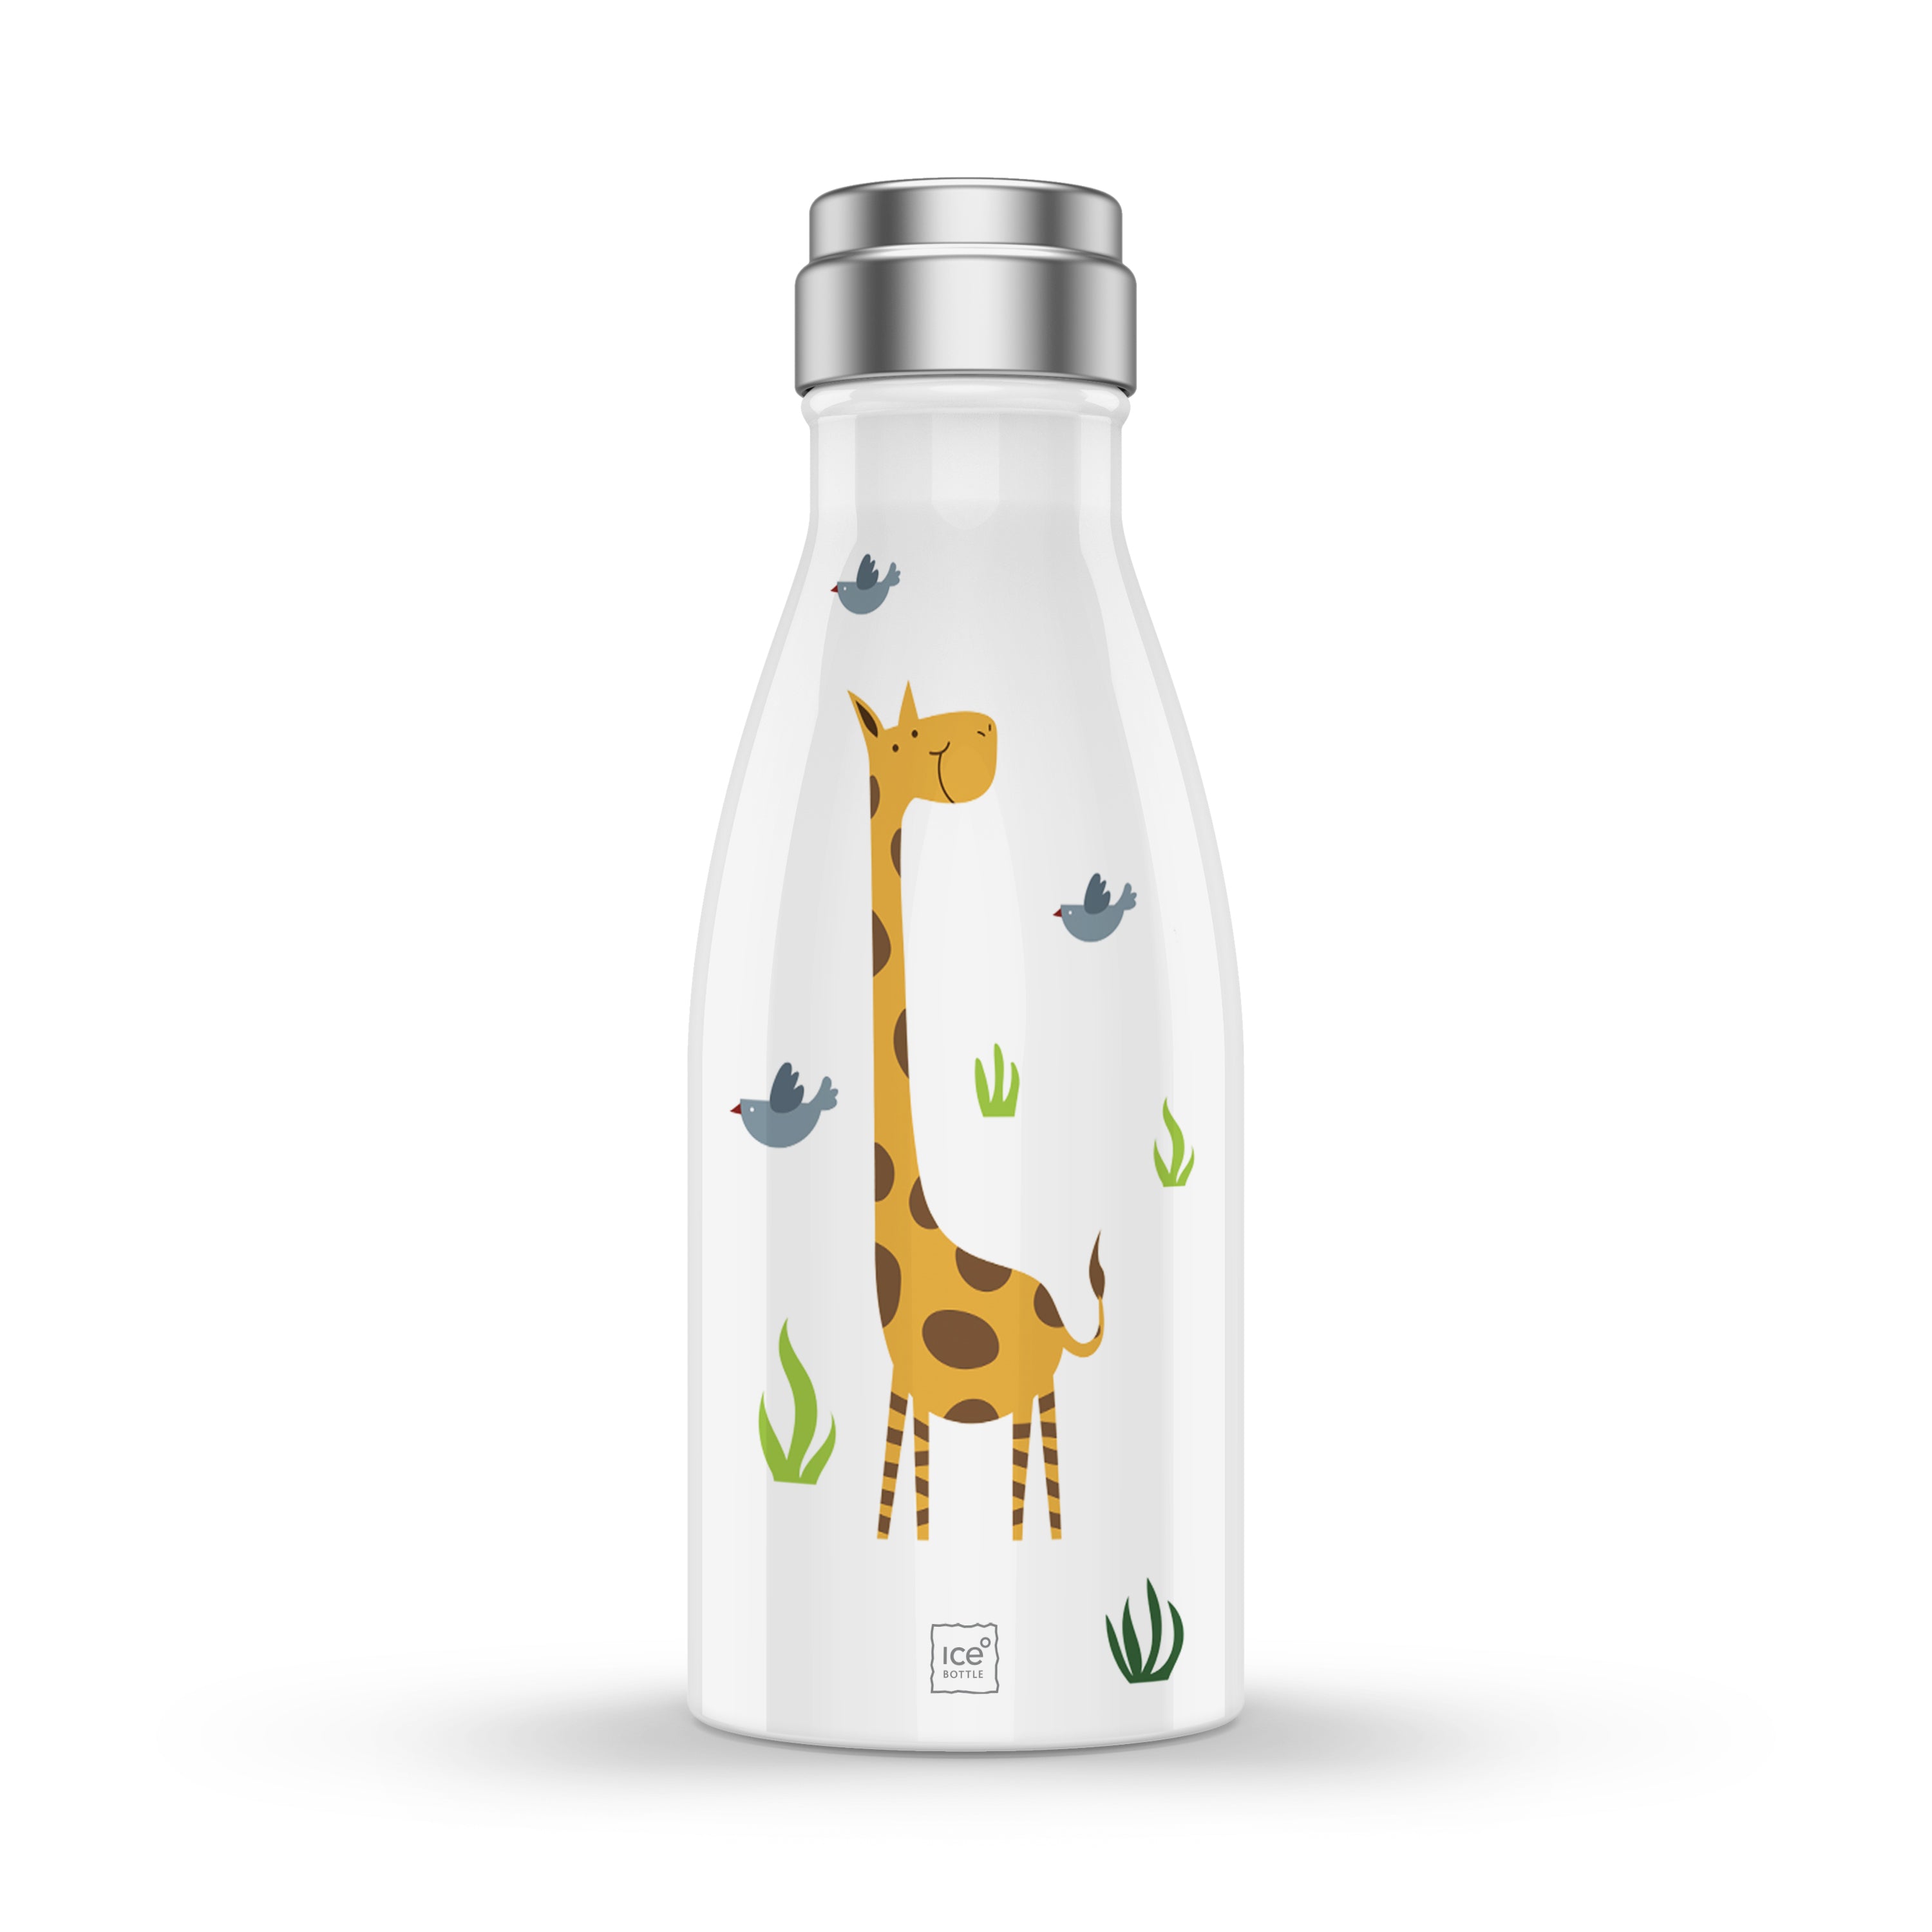 The perfect size bottle for smaller hands and perfect for small backpacks and handbags. 